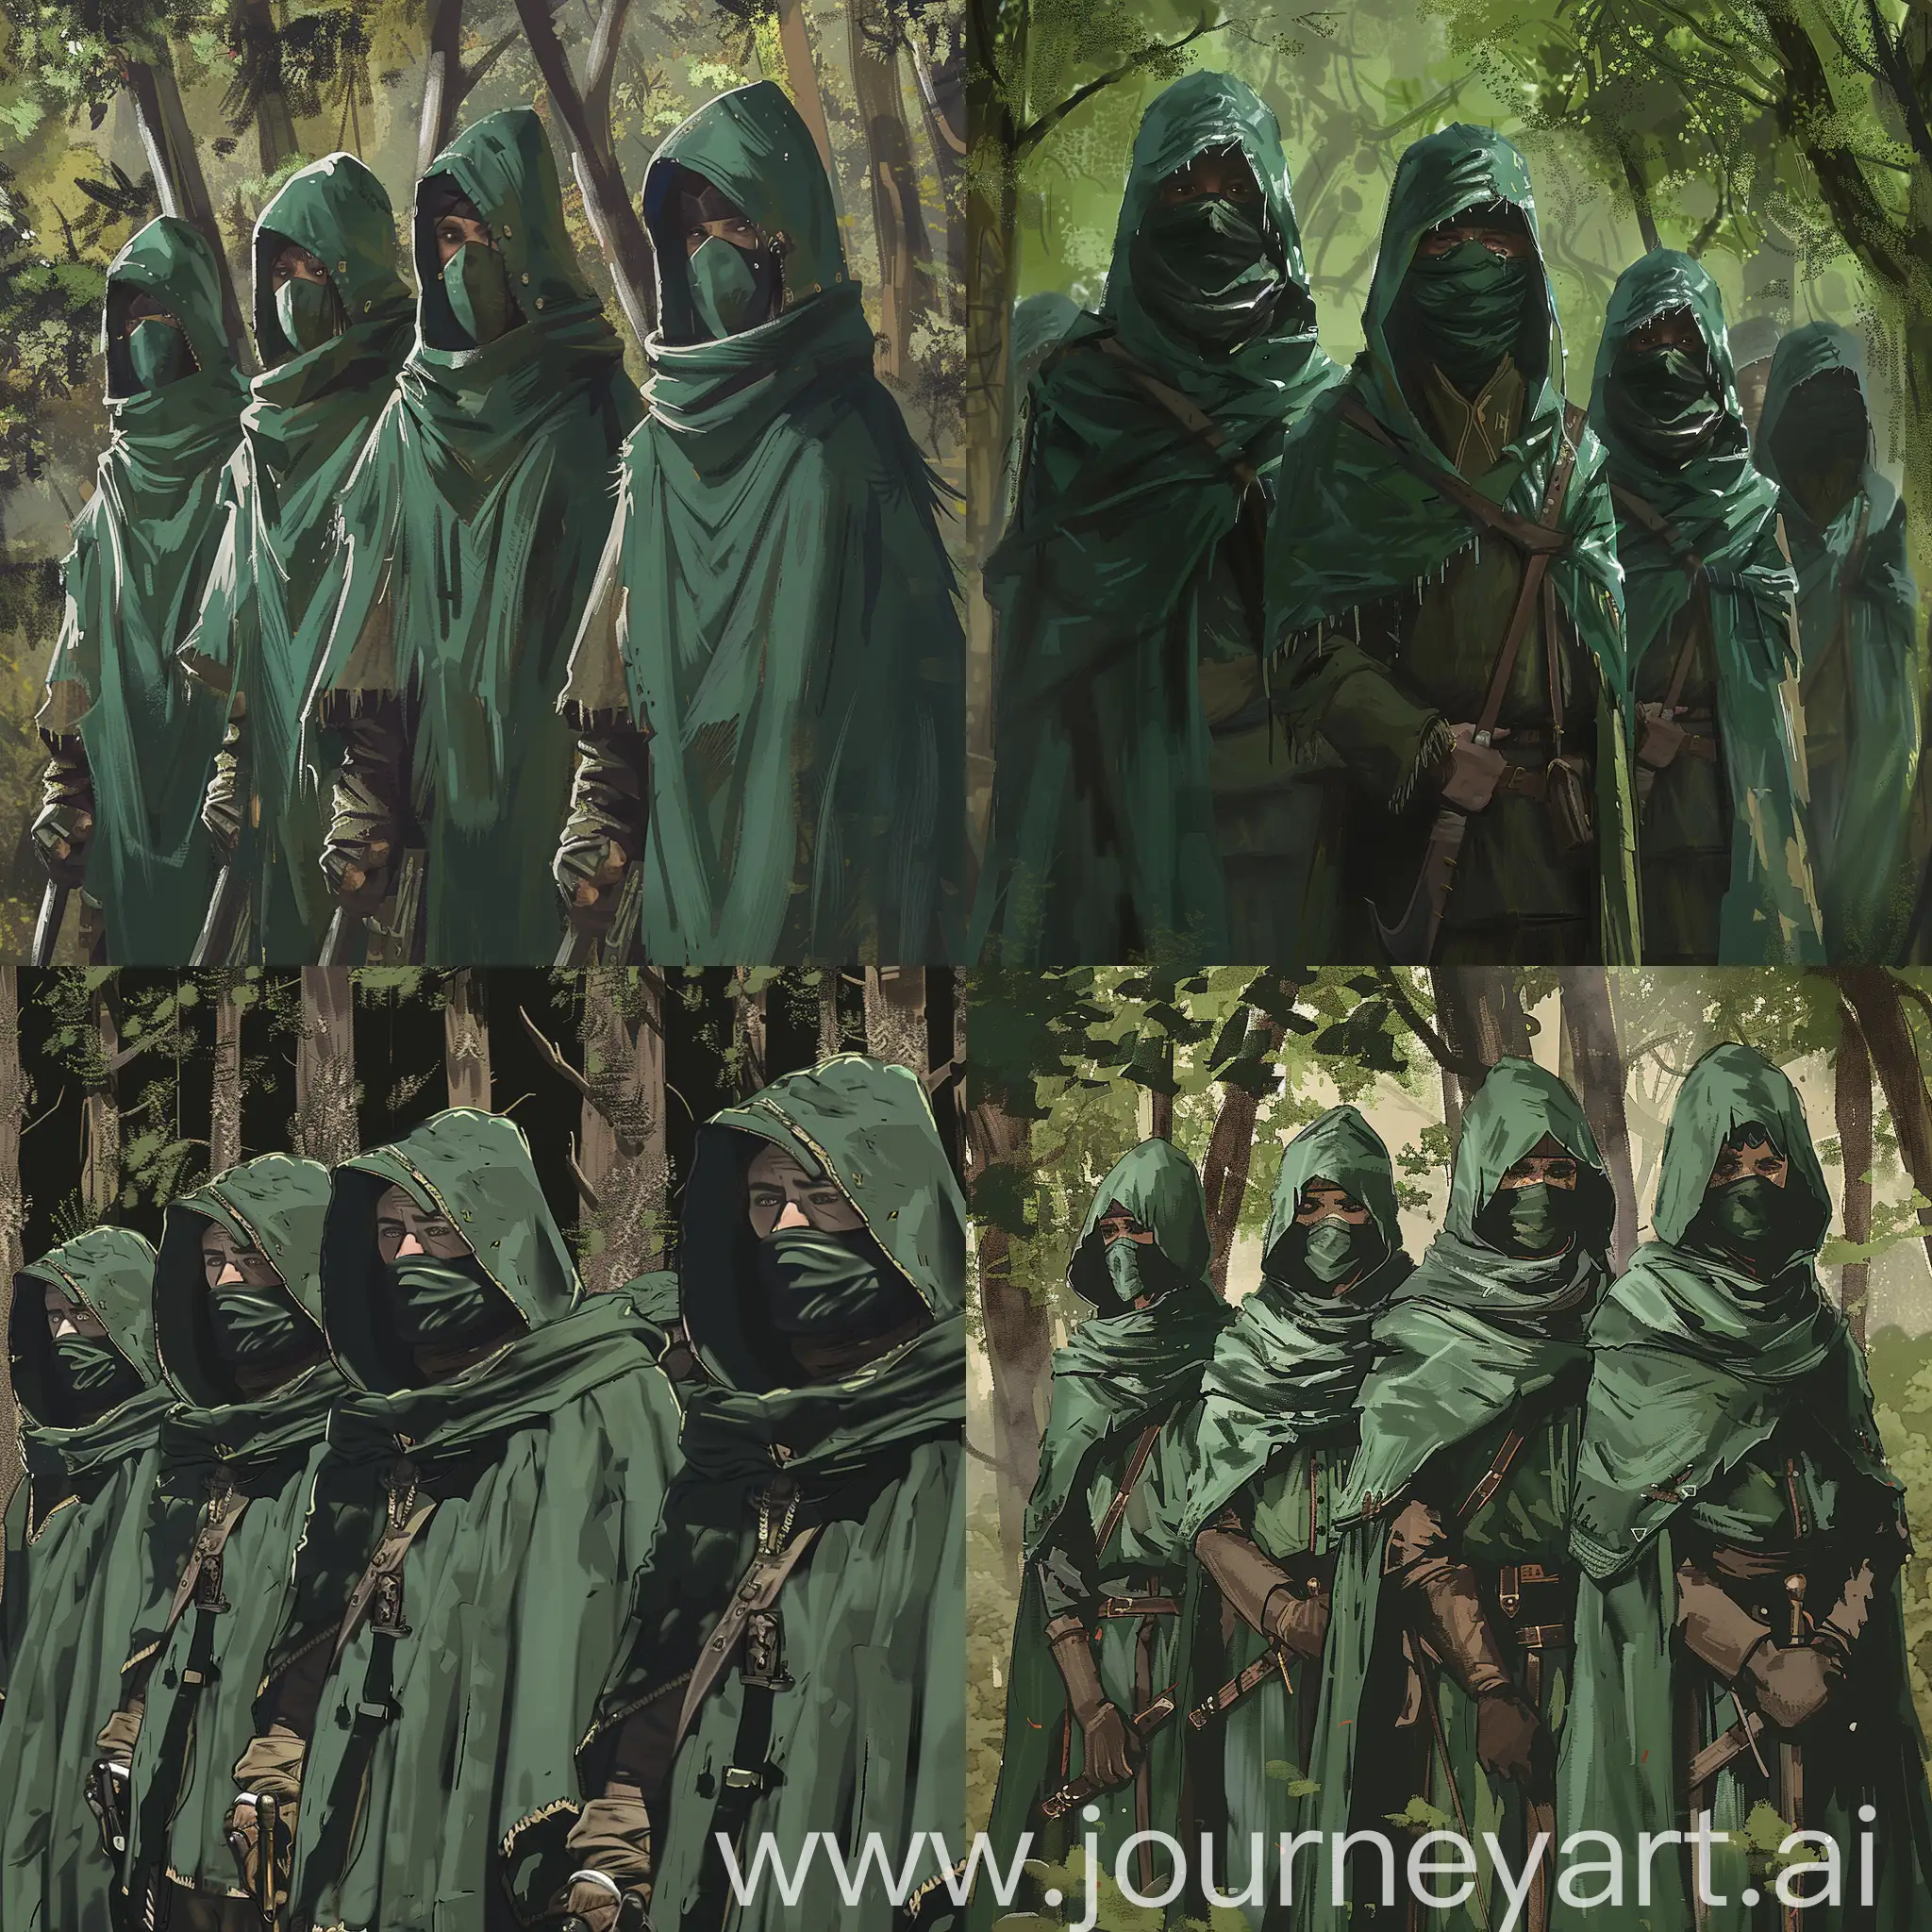 Draw art: The Dunedin trackers are standing in a detachment in the forest. They are wearing green hooded cloaks, as well as a mask covering their mouths. All this is in the style of Crusader kings 3.